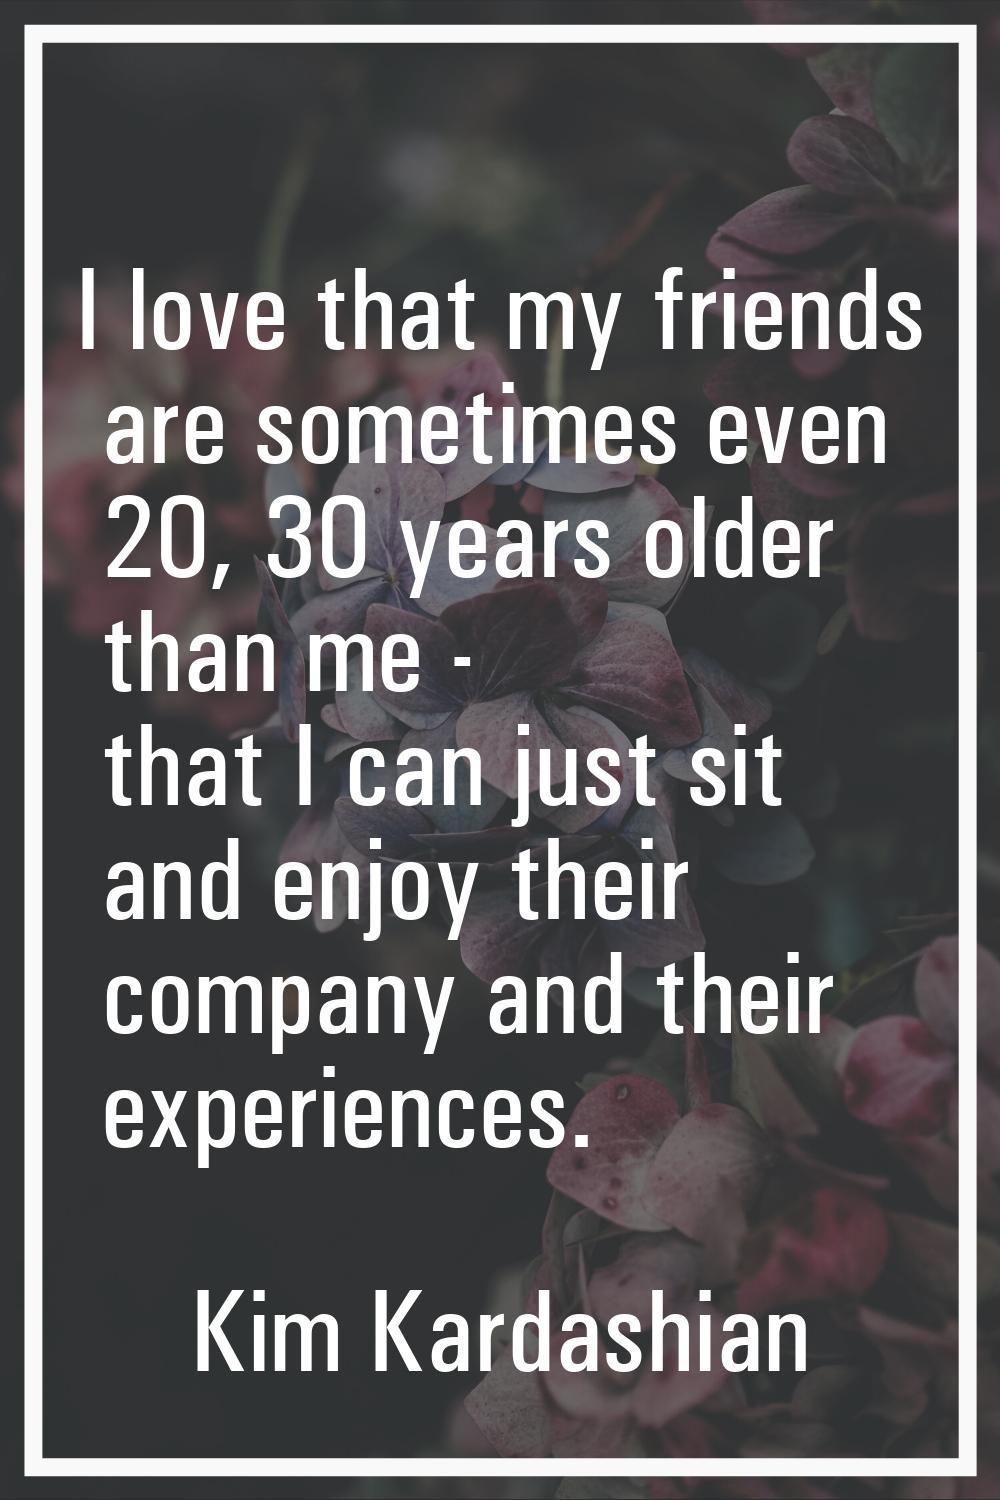 I love that my friends are sometimes even 20, 30 years older than me - that I can just sit and enjo